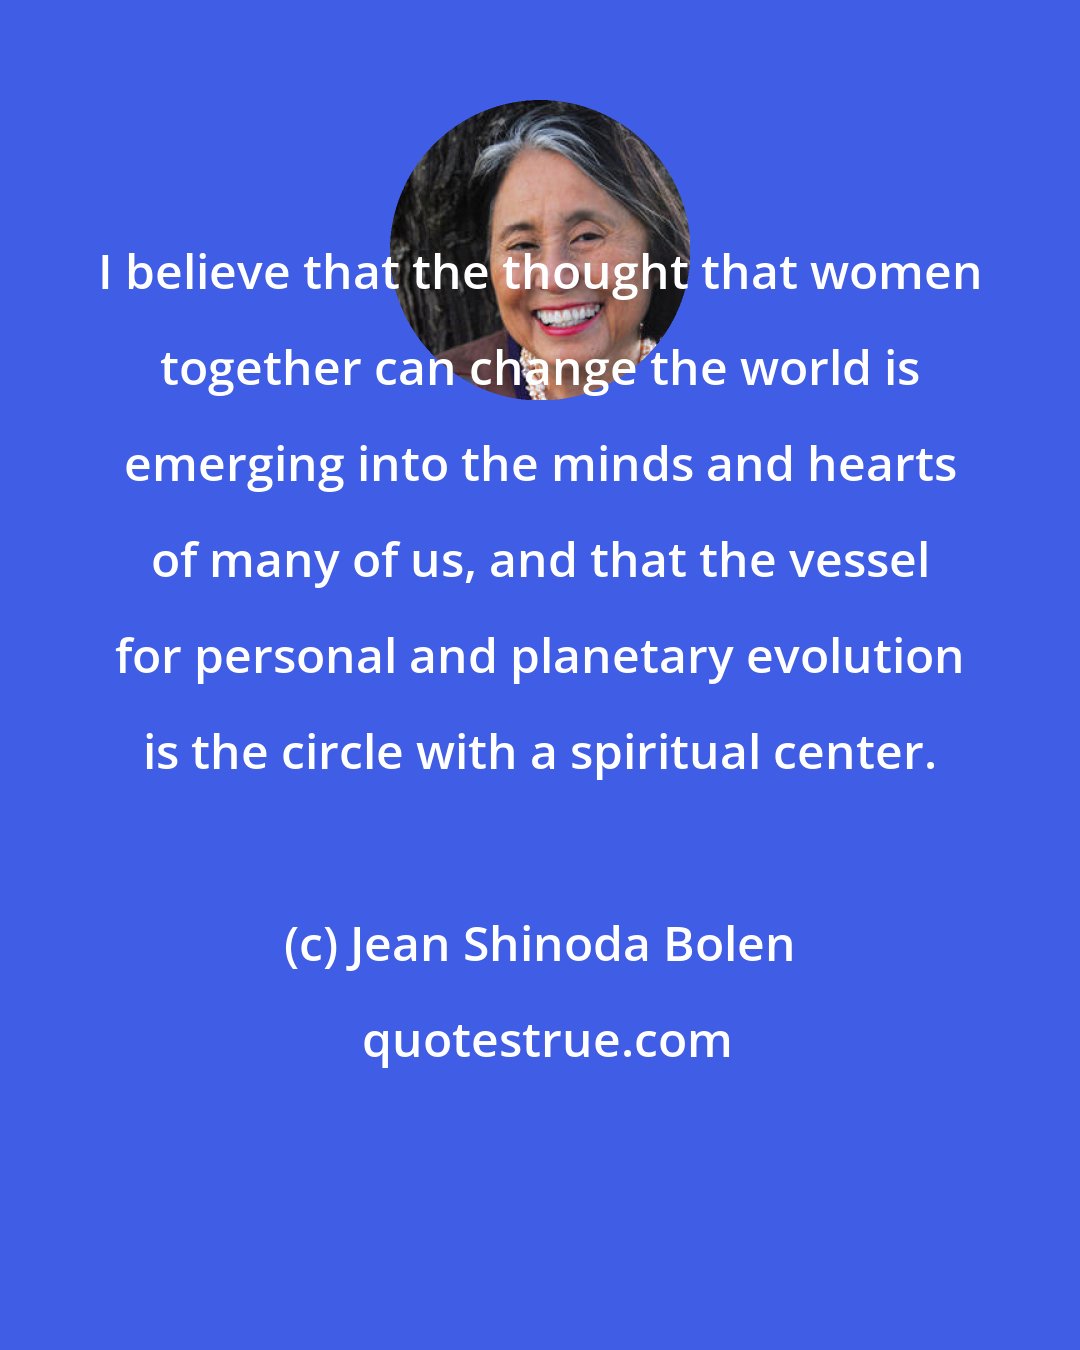 Jean Shinoda Bolen: I believe that the thought that women together can change the world is emerging into the minds and hearts of many of us, and that the vessel for personal and planetary evolution is the circle with a spiritual center.